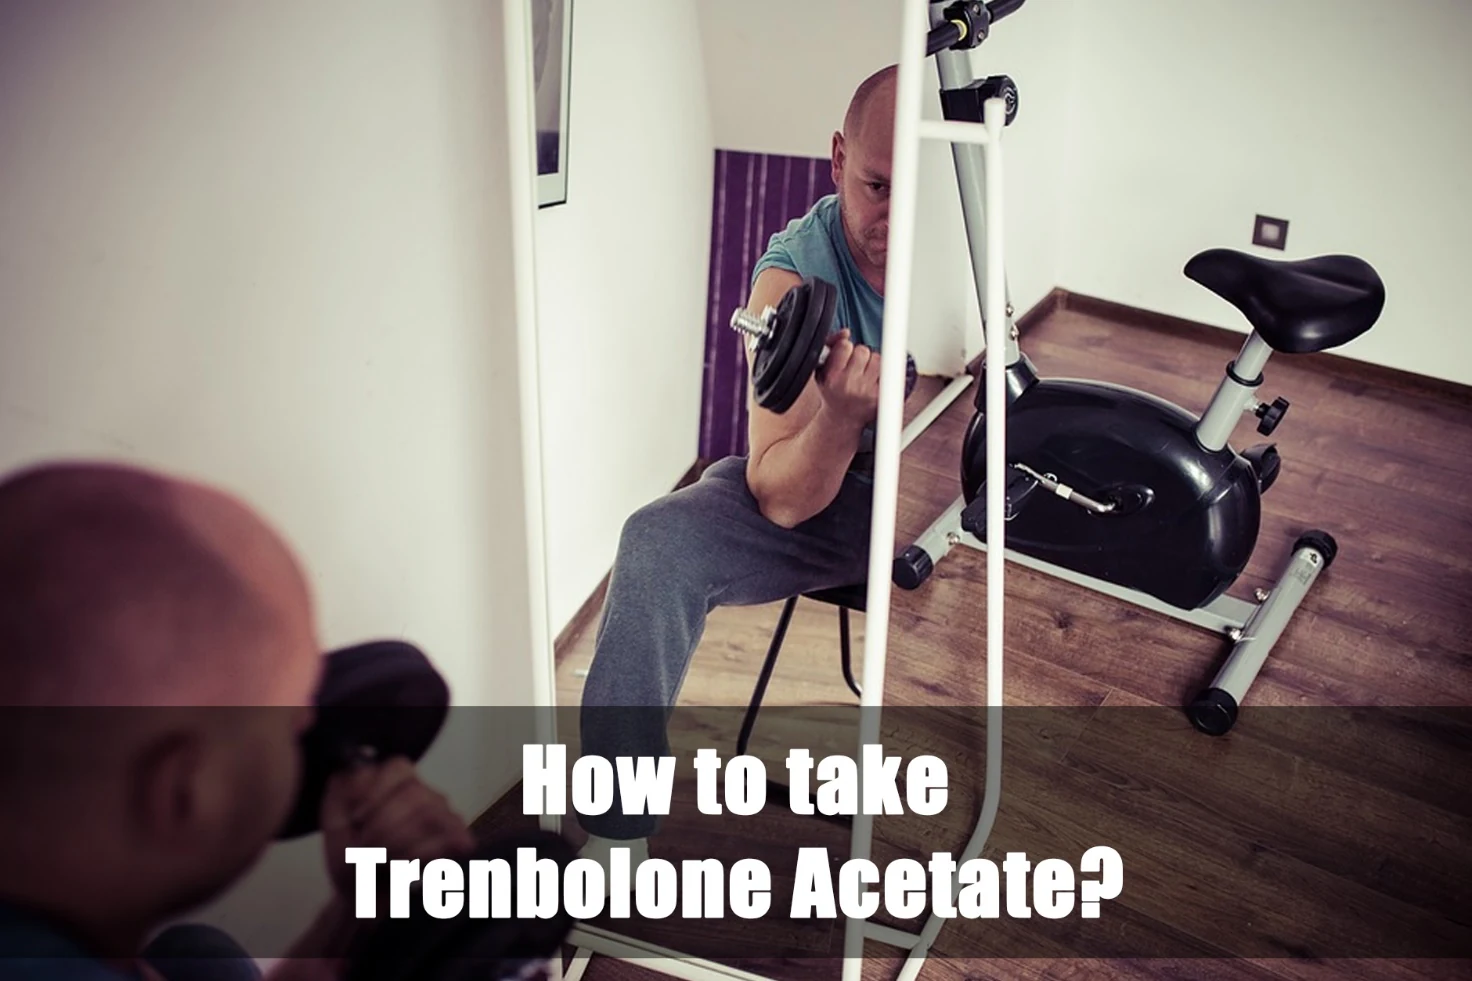 How to take Trenbolone Acetate